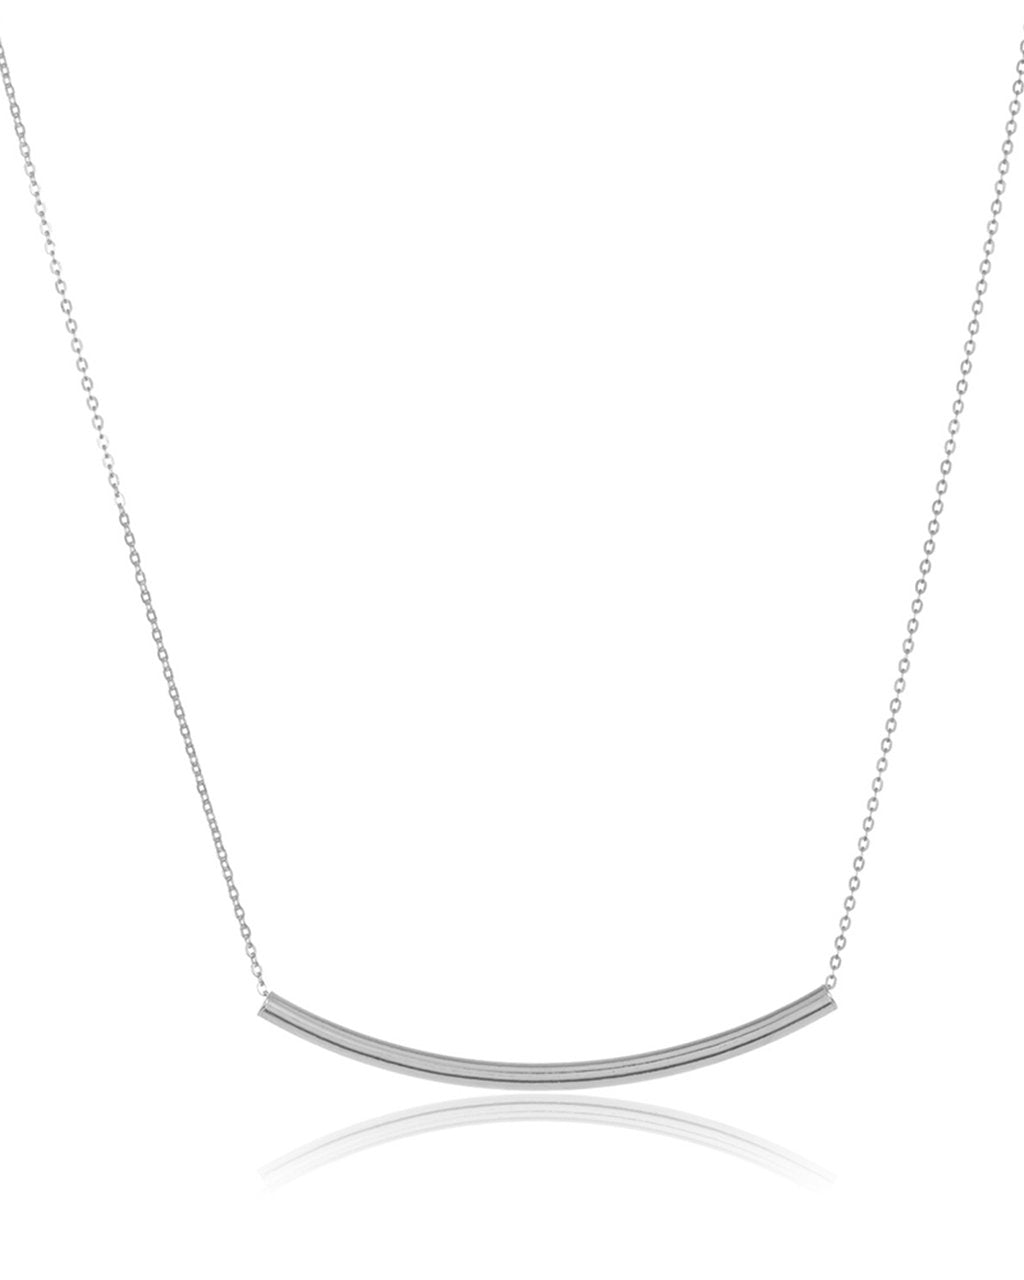 Curved Graduated Necklace Gifts In Sterling Silver